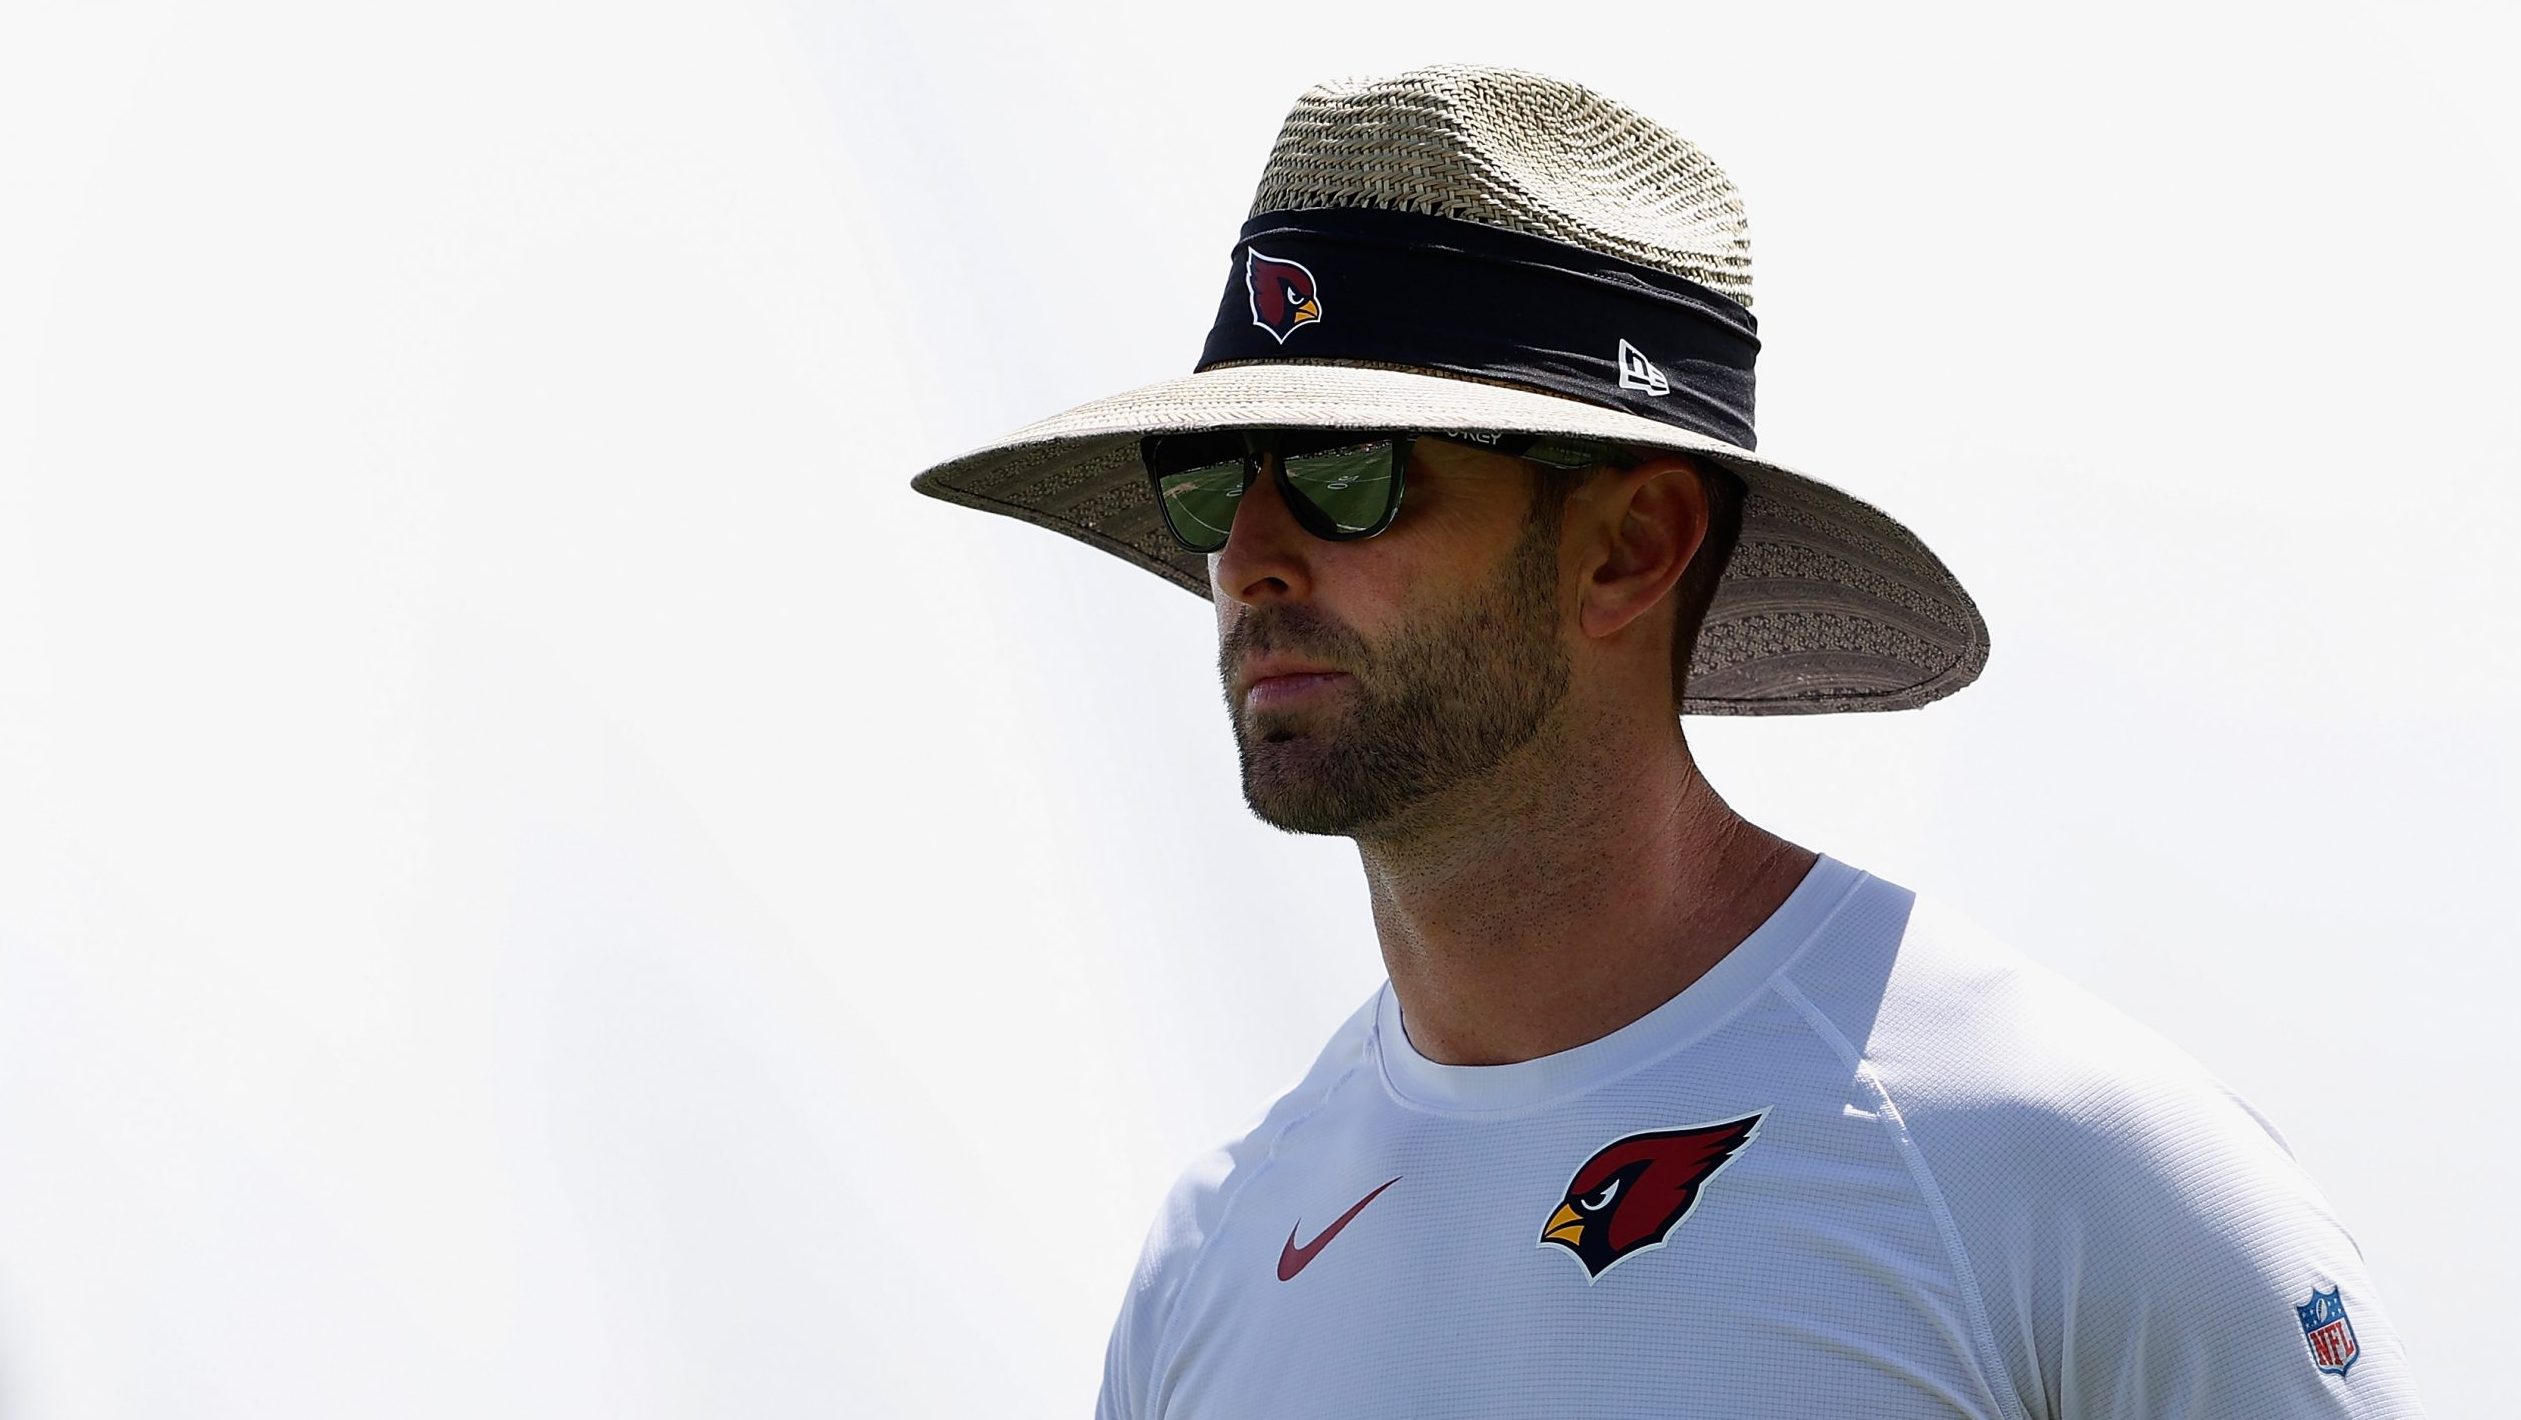 Head coach Kliff Kingsbury of the Arizona Cardinals participates in an off-season workout at Dignit...